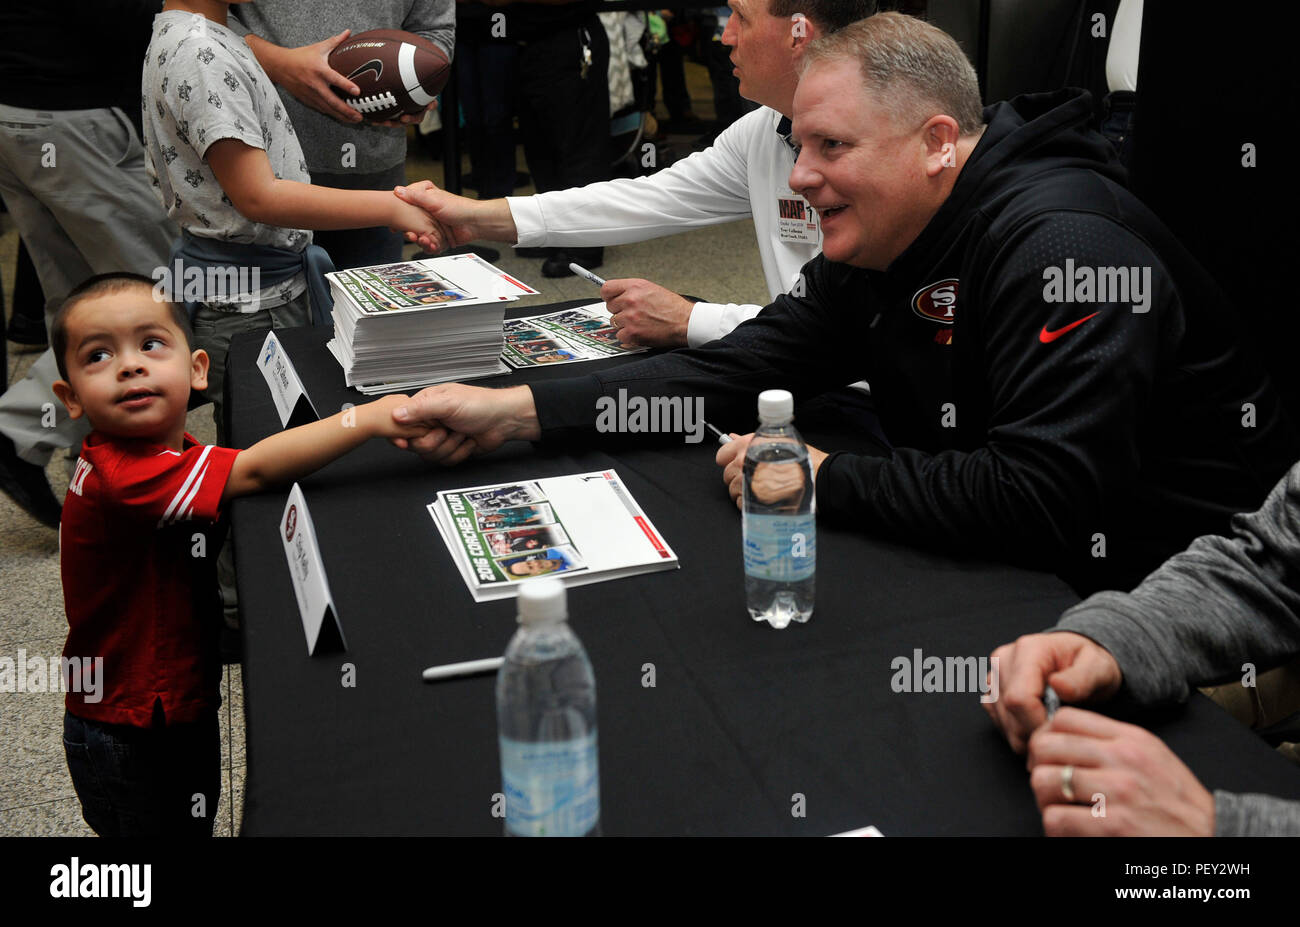 Chip Kelly, San Francisco 49ers head coach, shakes hands with a young fan during a meet-and-greet for the 2016 Coaches Tour Feb. 14, 2016, at Ramstein Air Base, Germany. Fans had the opportunity to meet, talk with and get autographs from four coaches from both collegiate and professional leagues. (U.S. Air Force photo/Airman 1st Class Larissa Greatwood) Stock Photo